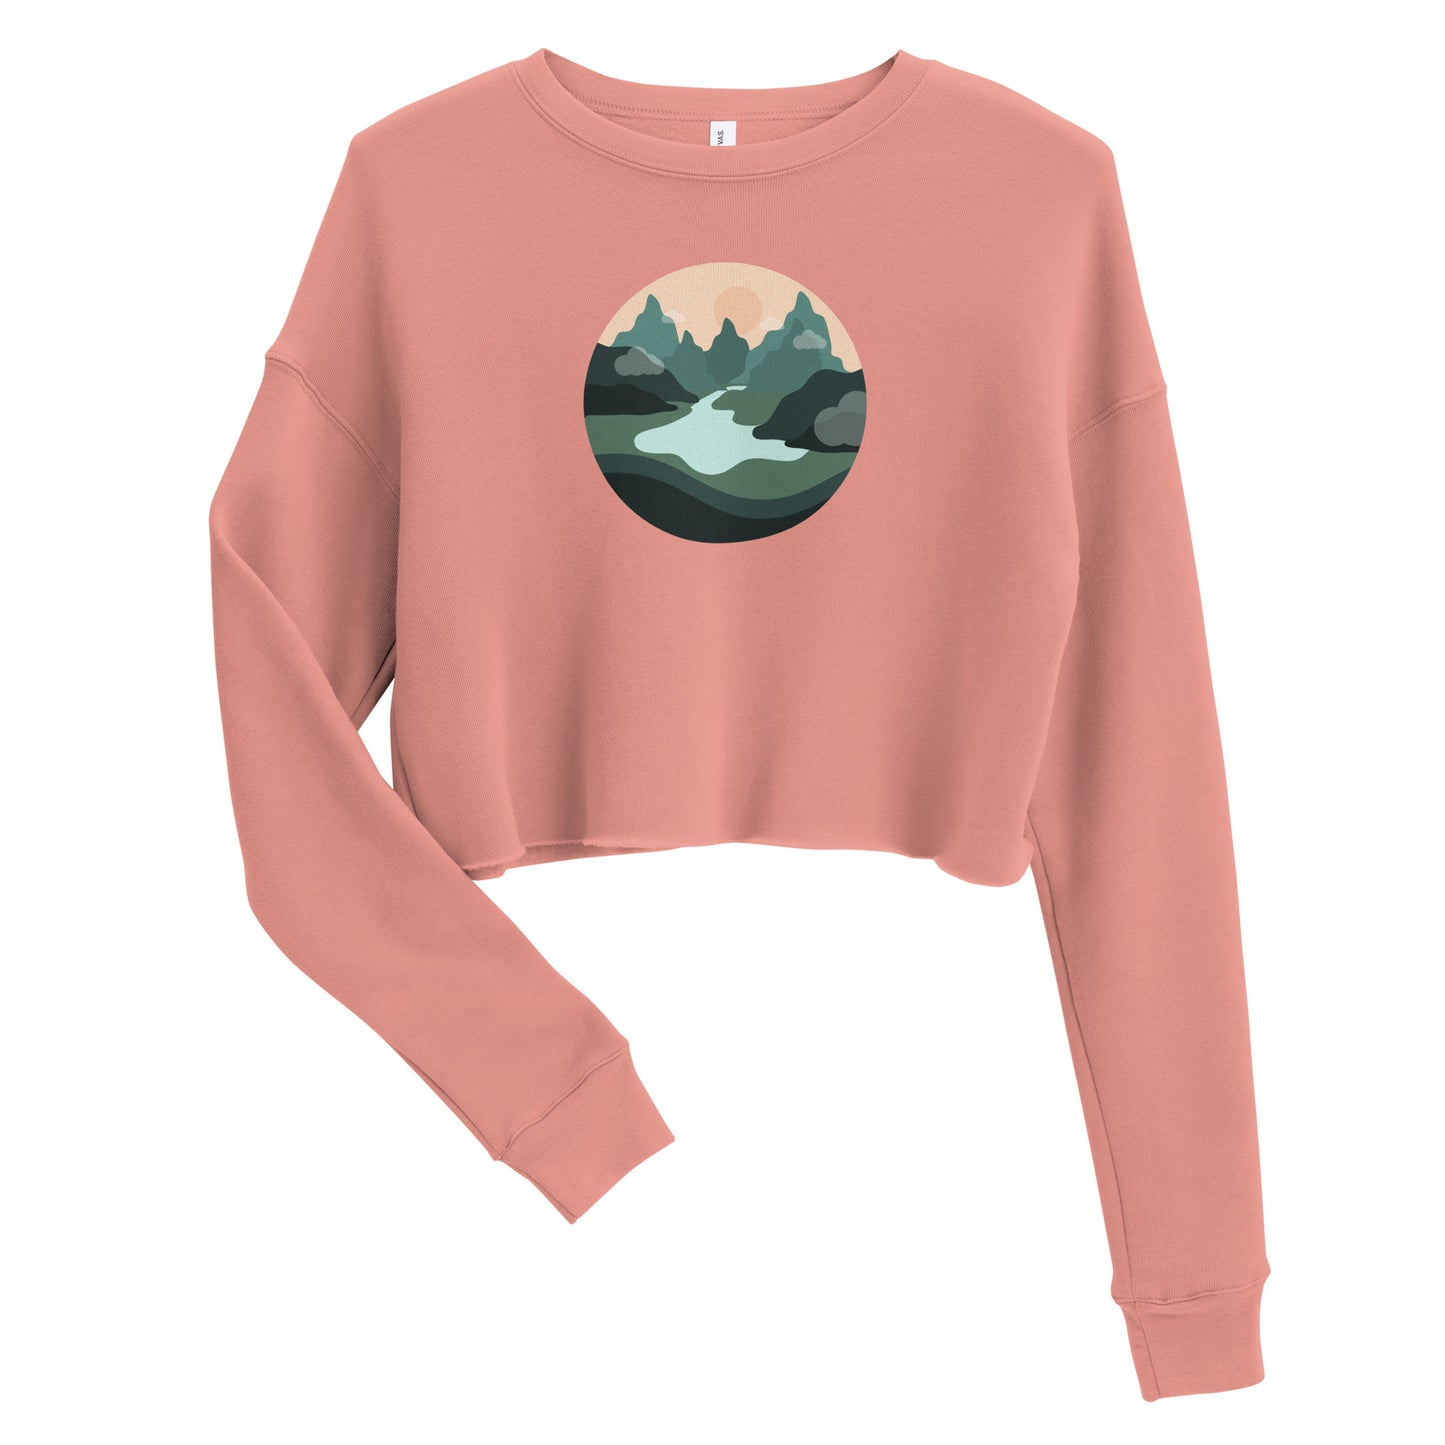 meadow mountain lake river sunset pretty colors tshirt t-shirt sleeves comfy cozy shop store merch